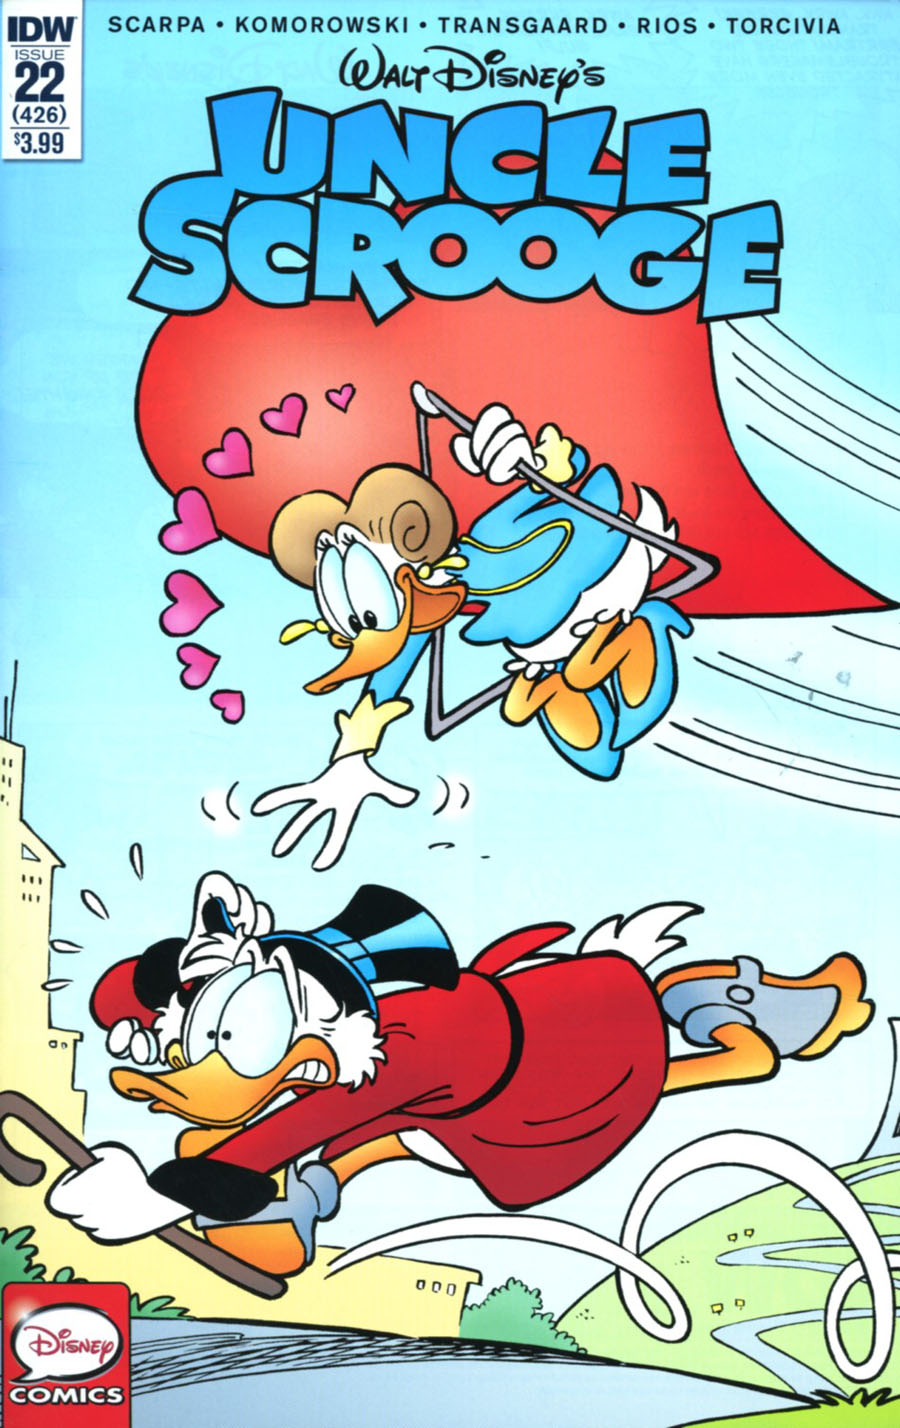 Uncle Scrooge Vol 2 #22 Cover A Regular Silvia Ziche Cover